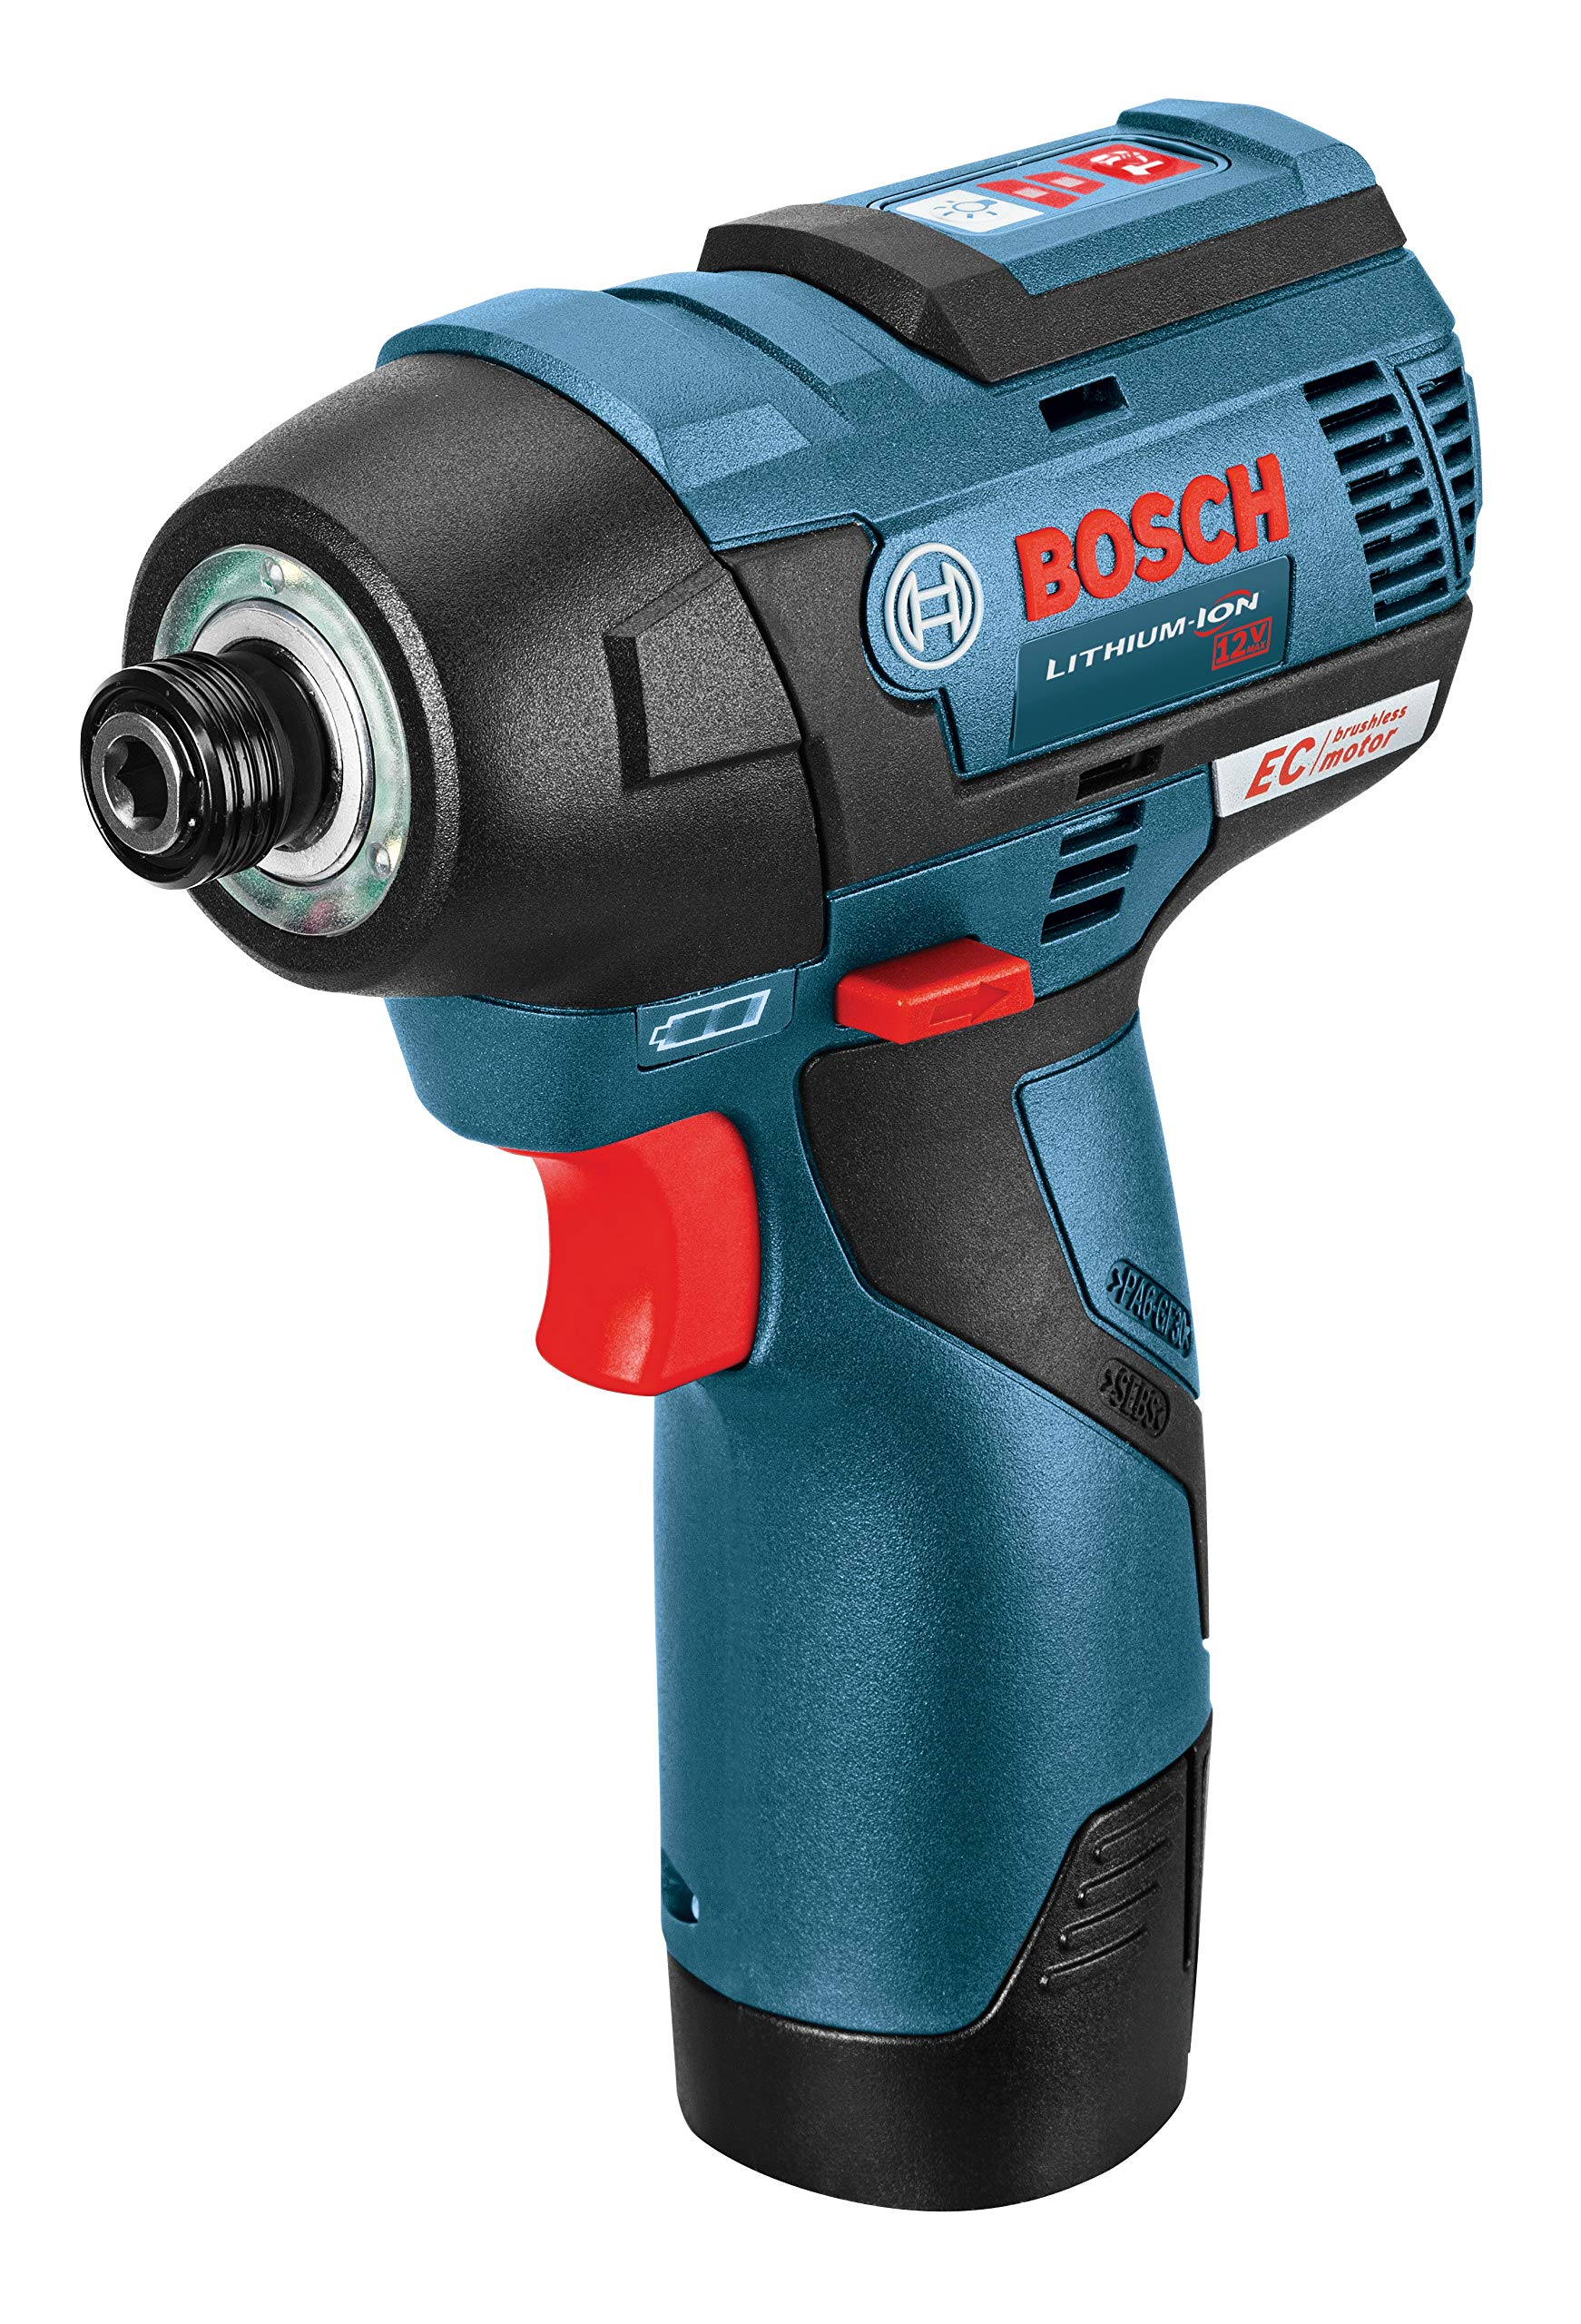 BOSCH GXL12V-220B22 12V Max 2-Tool Brushless Combo Kit with 3/8 In. Drill/Driver, 1/4 In. Hex Impact Driver and (2) 2.0 Ah Batteries, Brushless 12V Kit